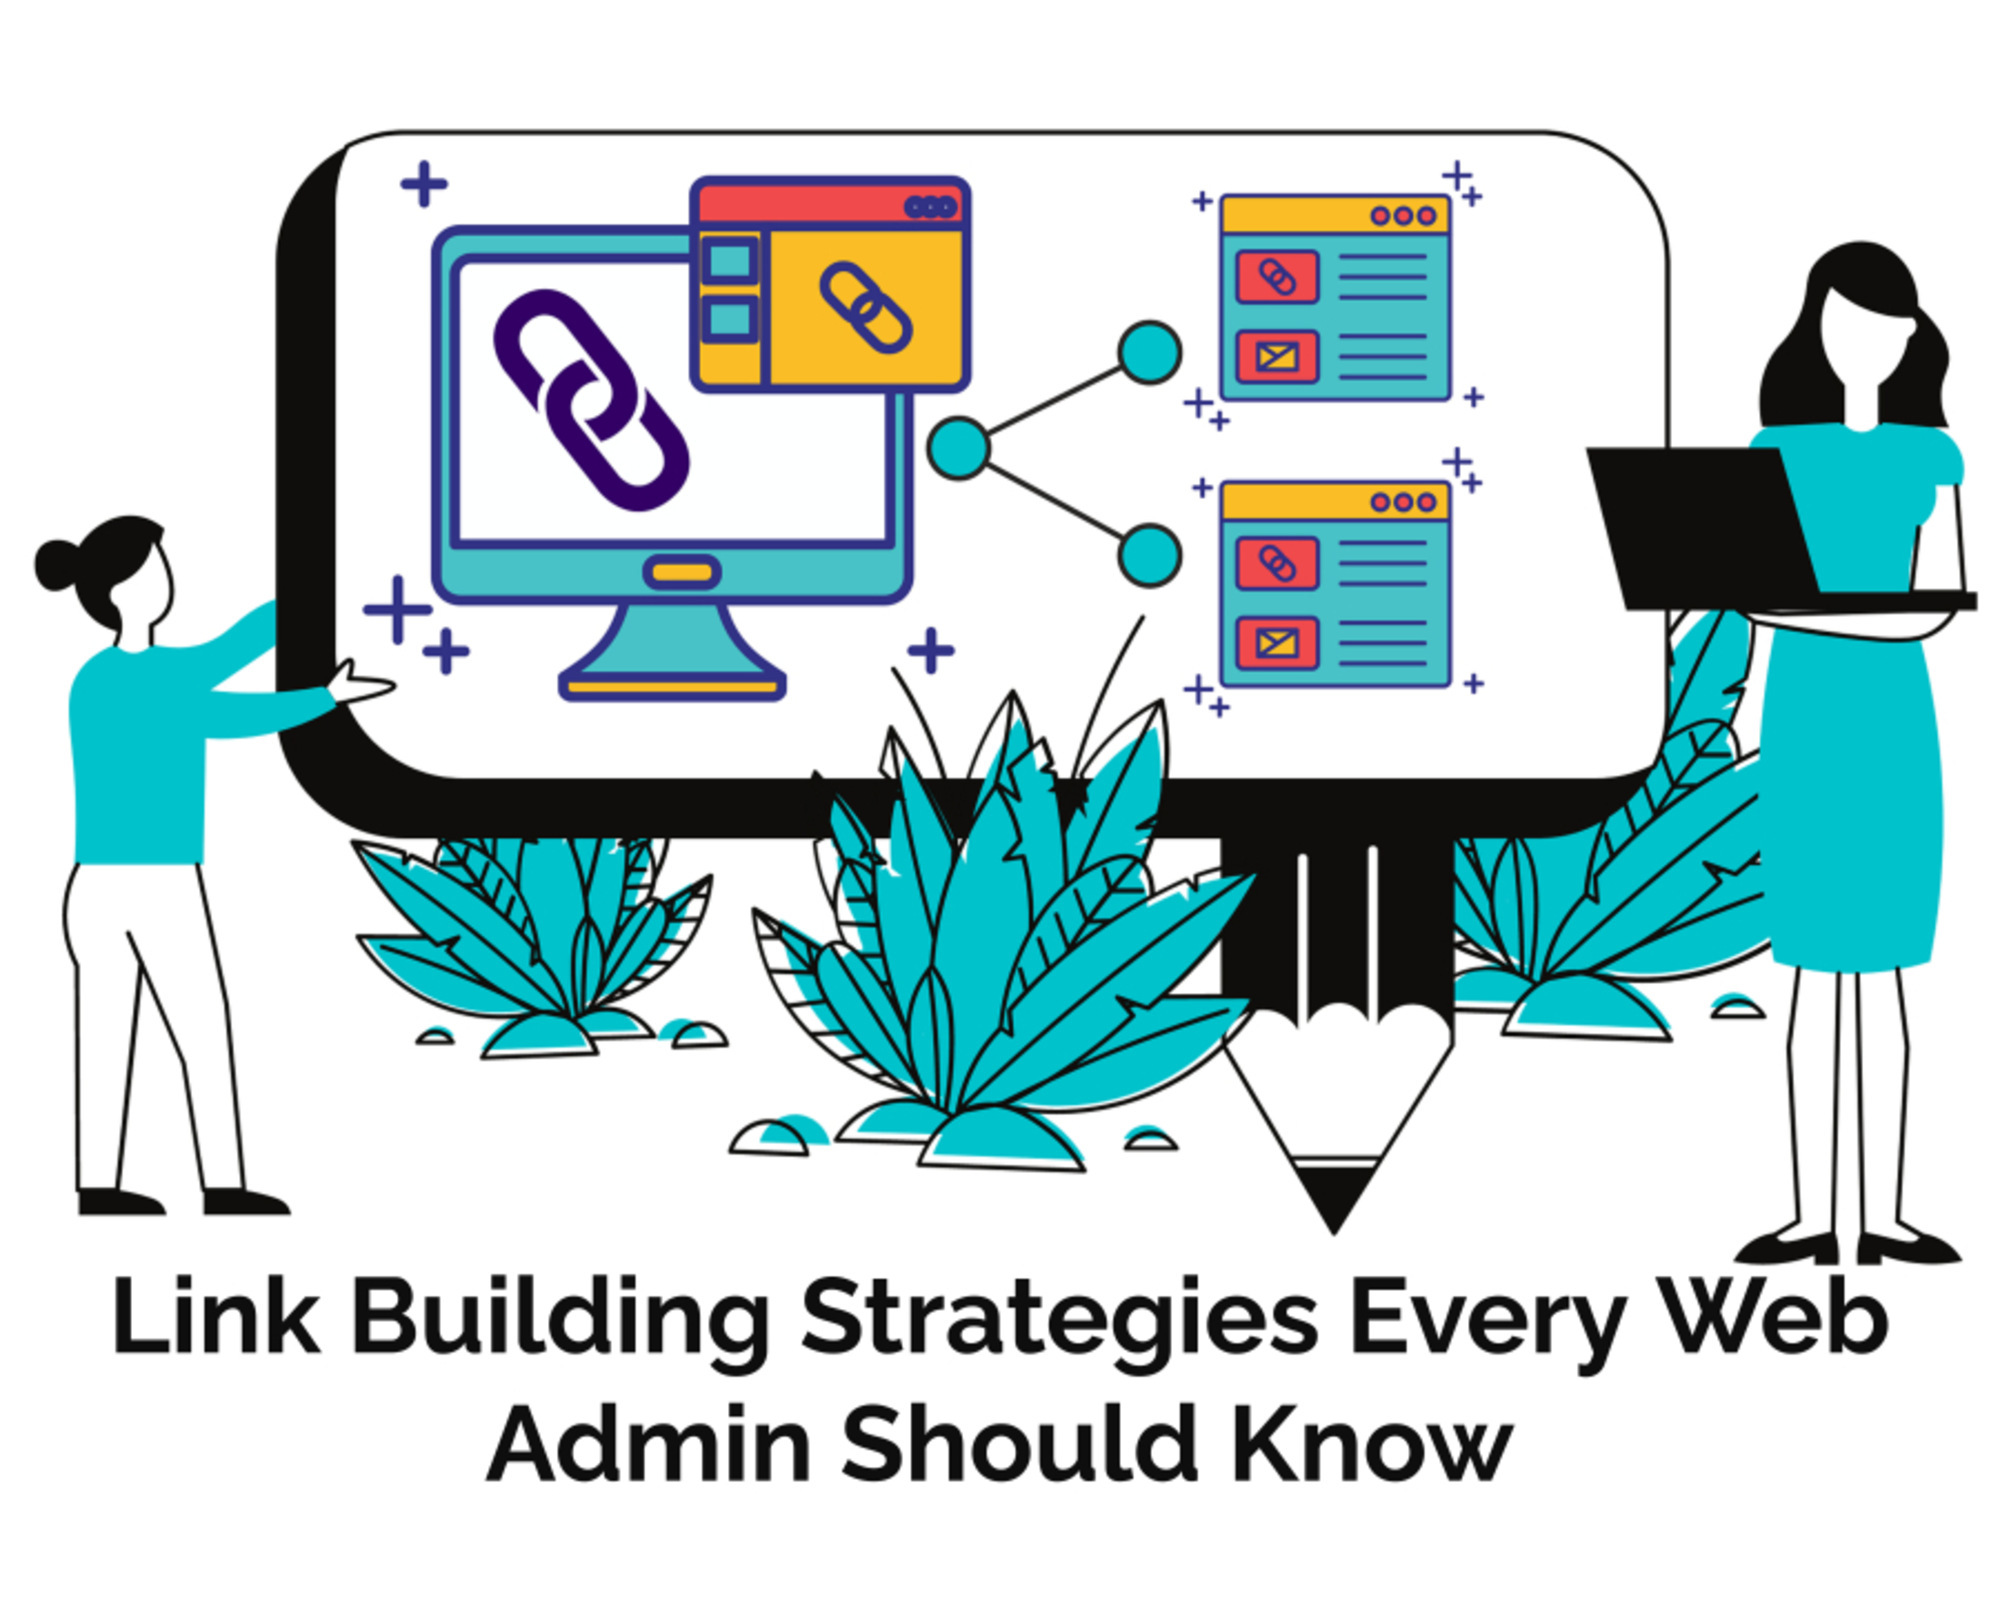 Link Building Strategies Every Web Admin Should Know